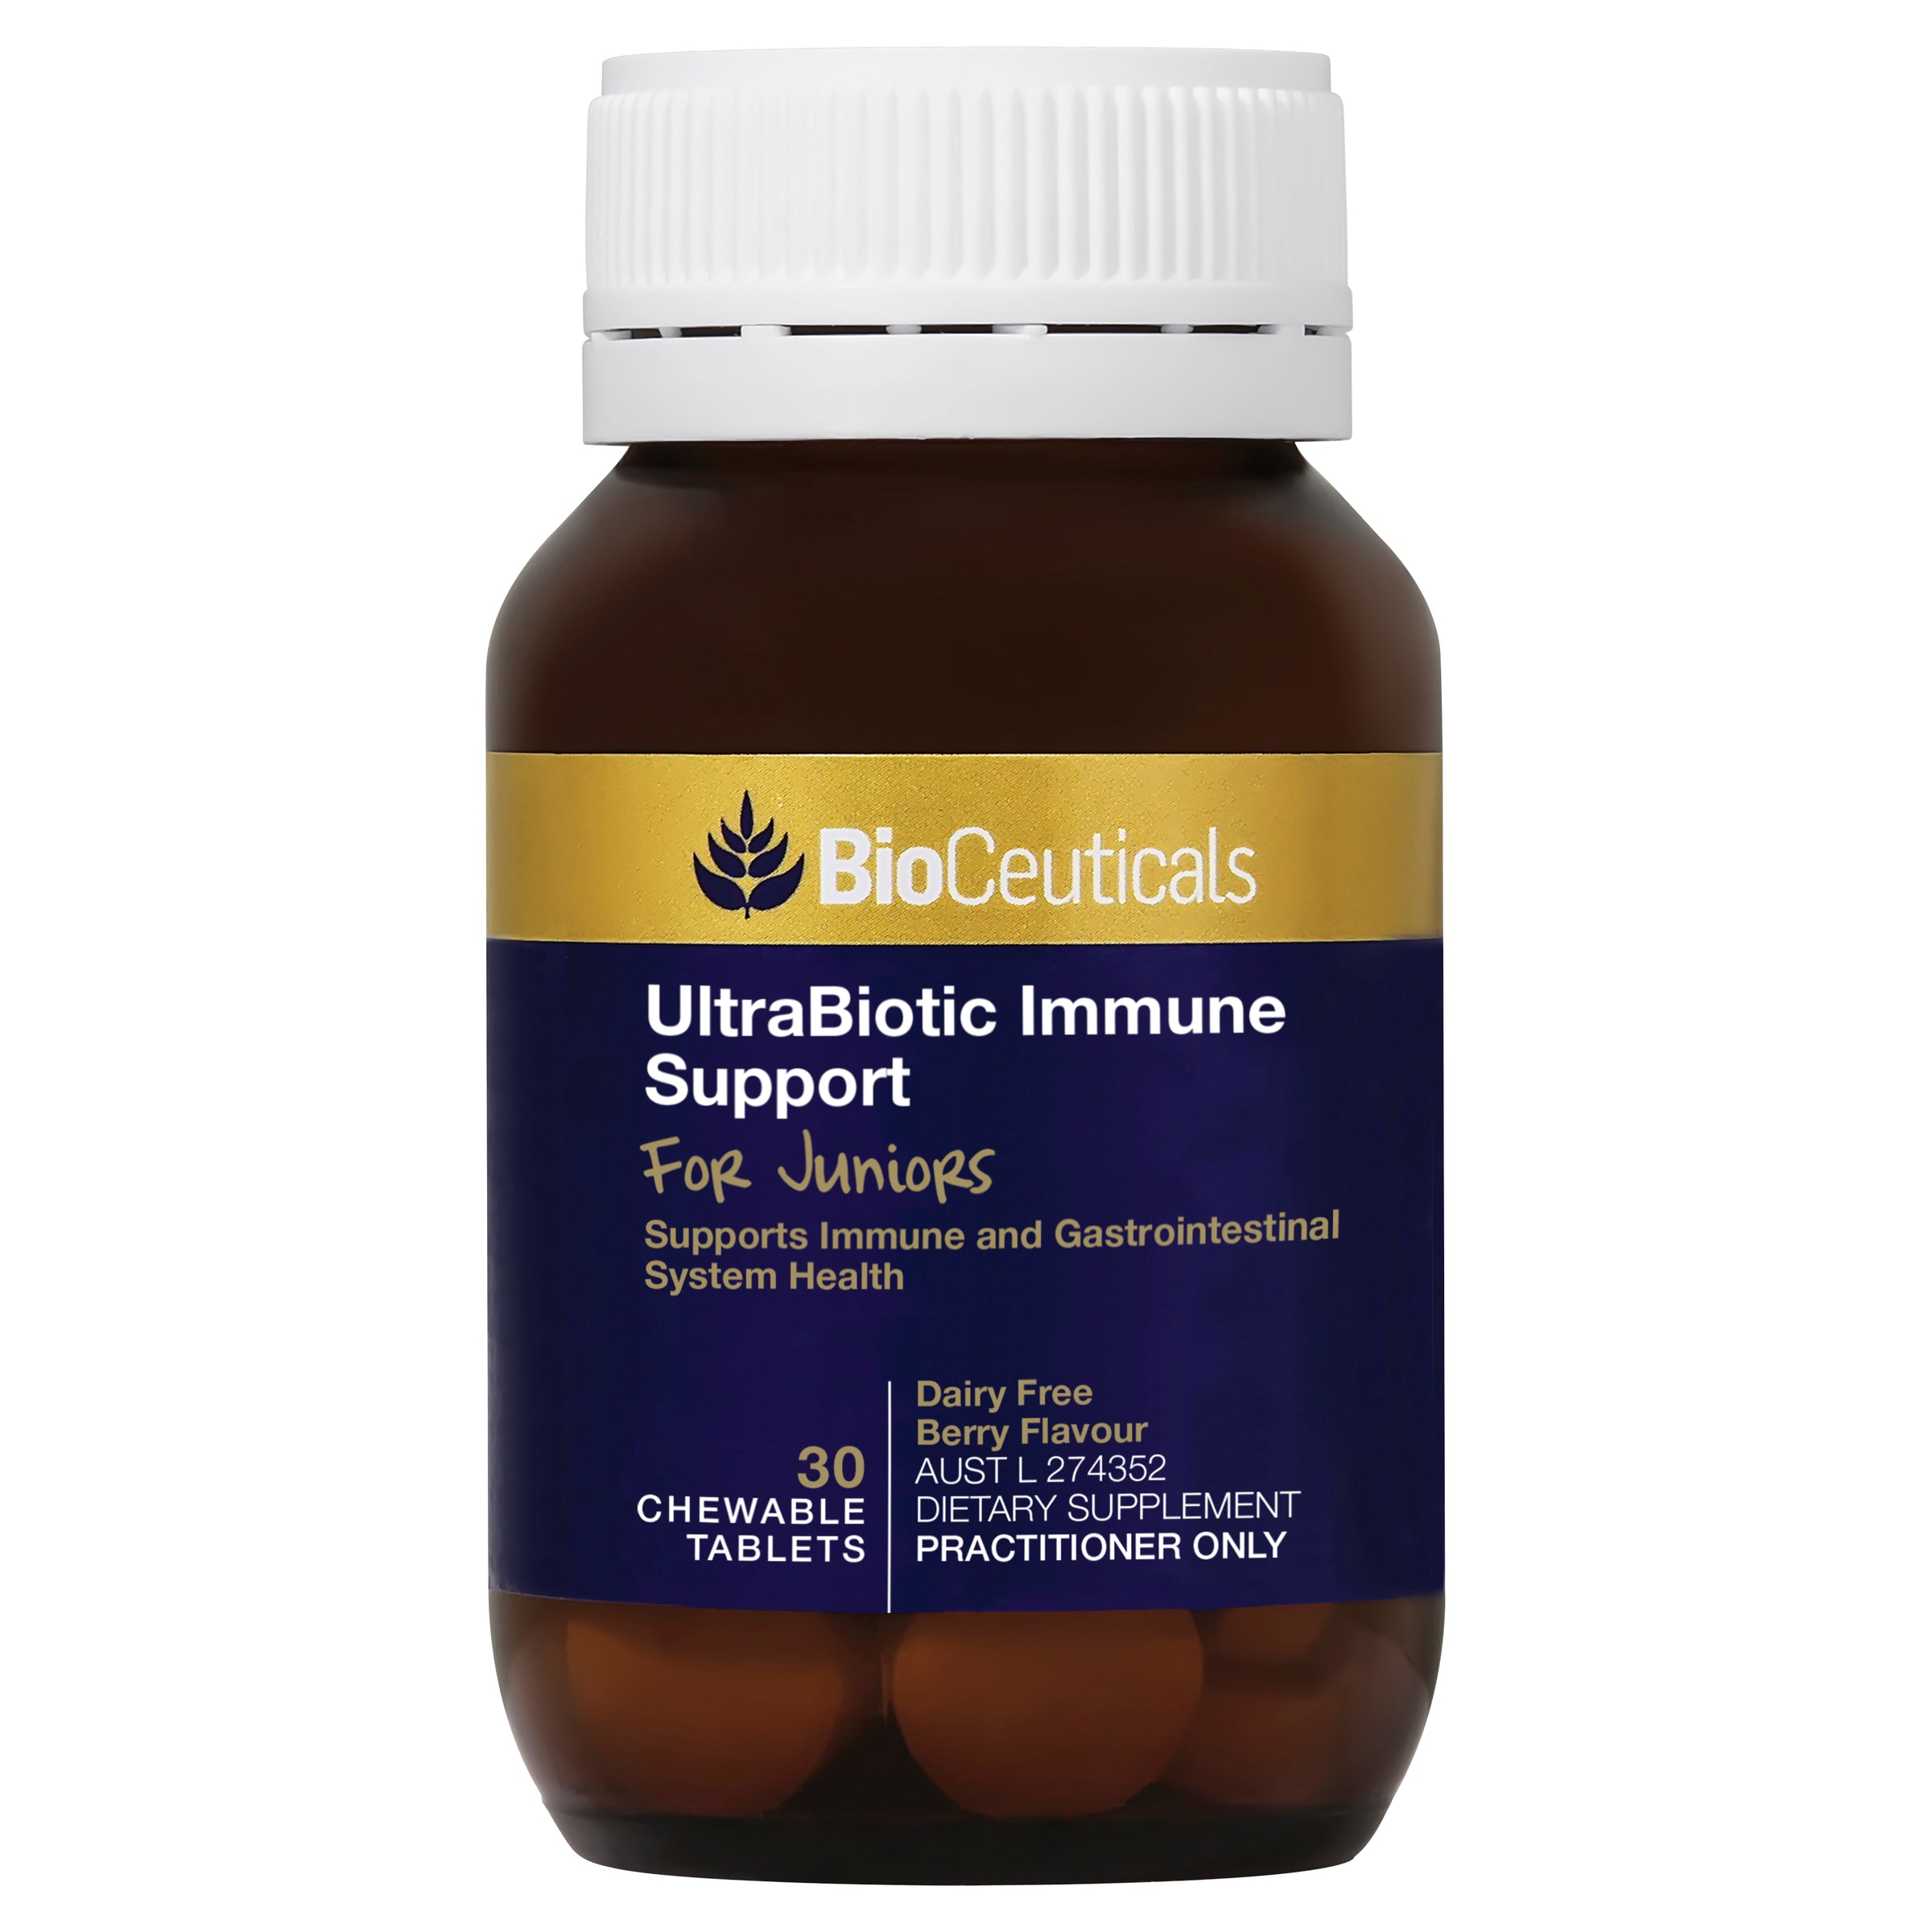 BioCeuticals UltraBiotic Immune Support for Juniors Chewable Tablets 30s